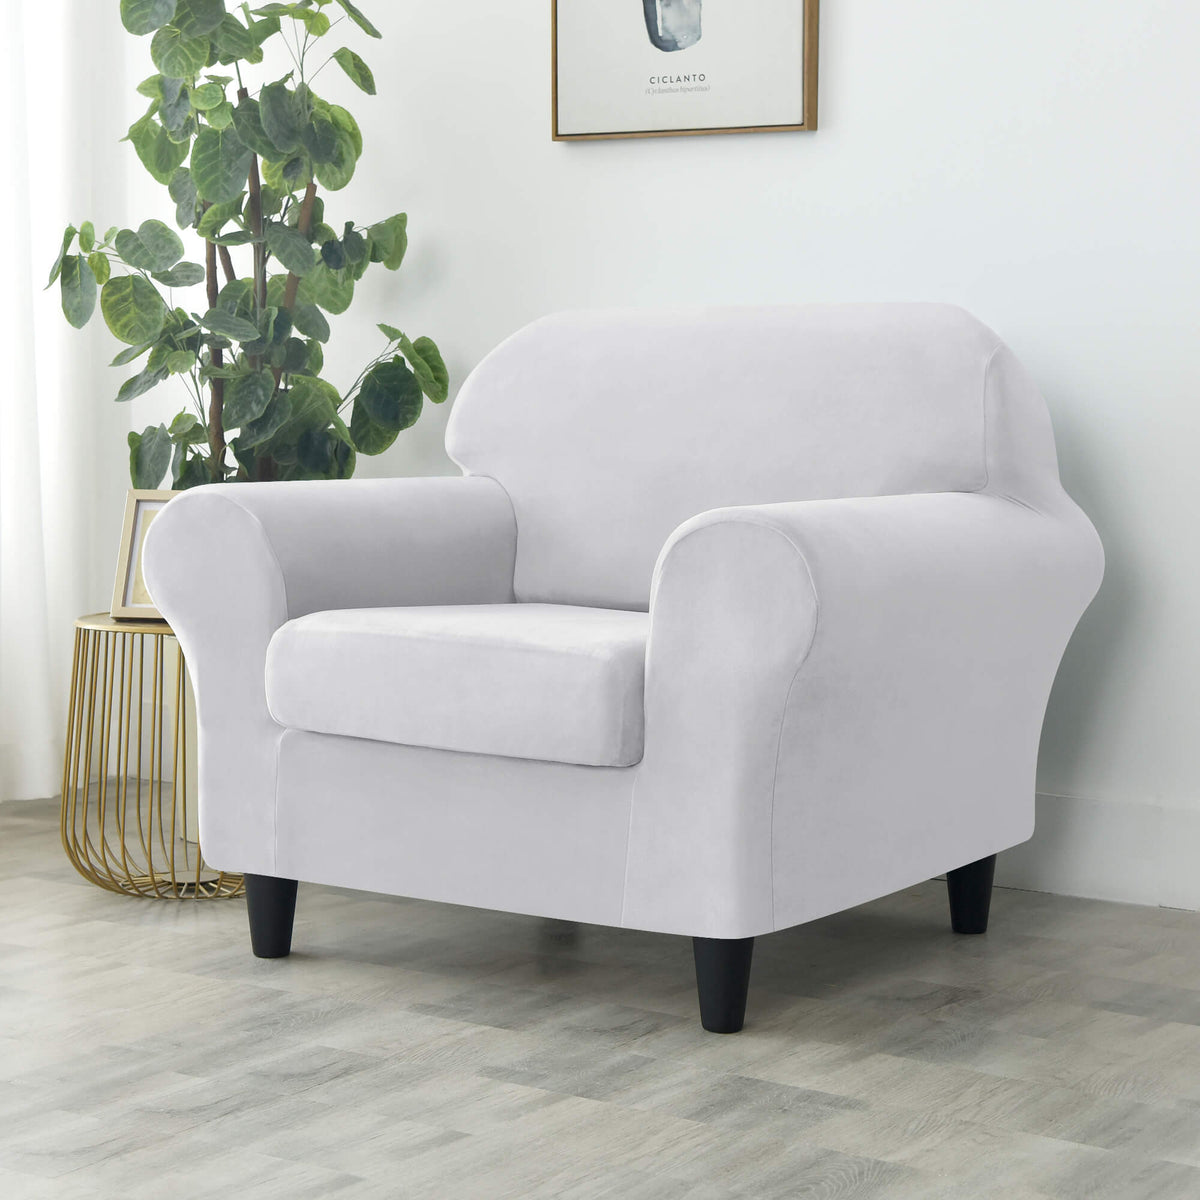 Crfatop Modern Couch Cover Stretch Armchair Sofa Seat Slipcovers with Elastic Bottom ArmchairWhite